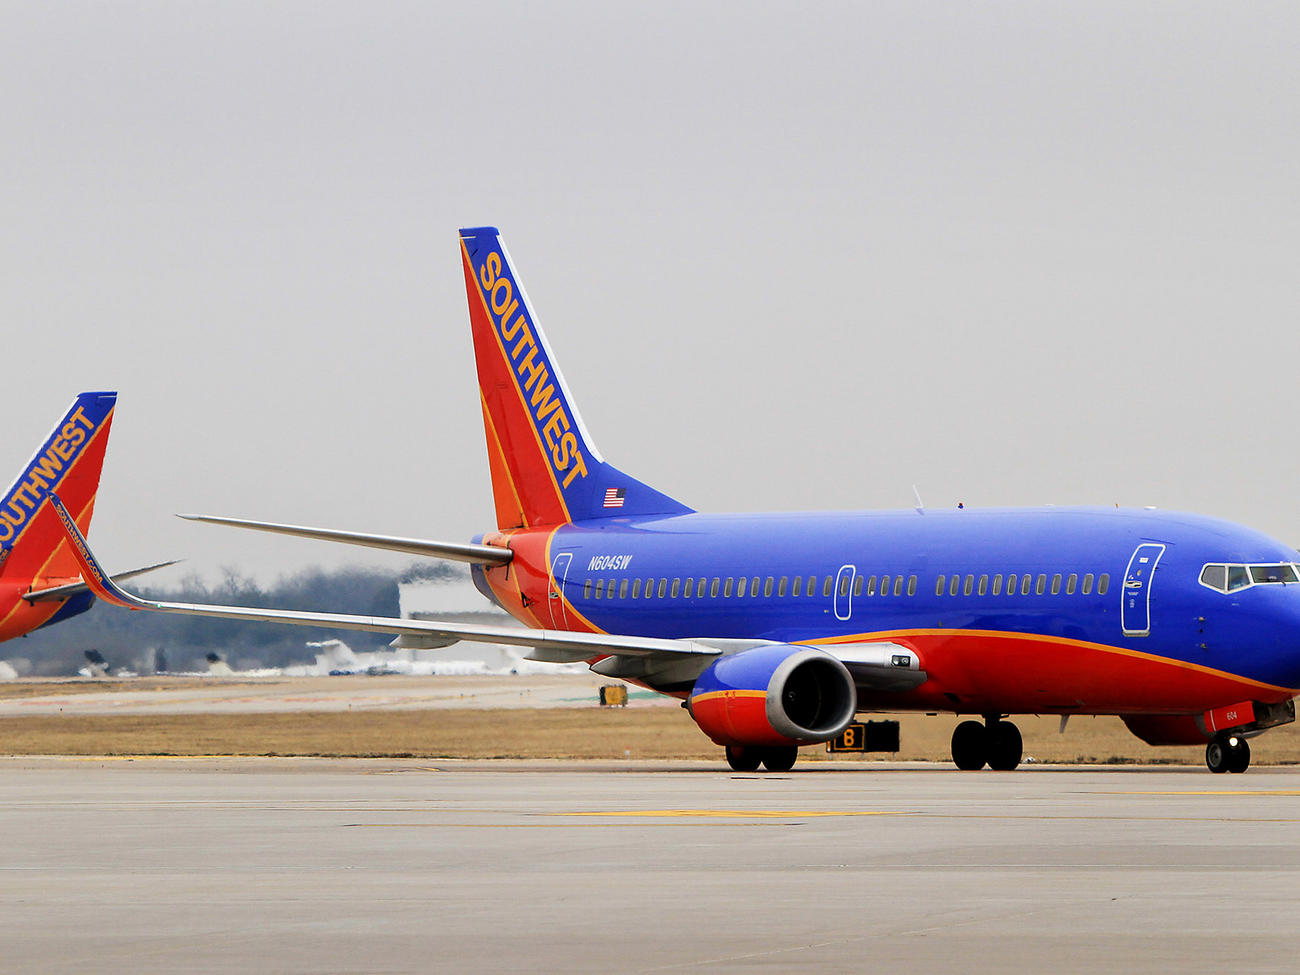 Southwest Is Giving New Credit Card Holders a One-Year Companion Pass — and It’s Seriously Unheard Of